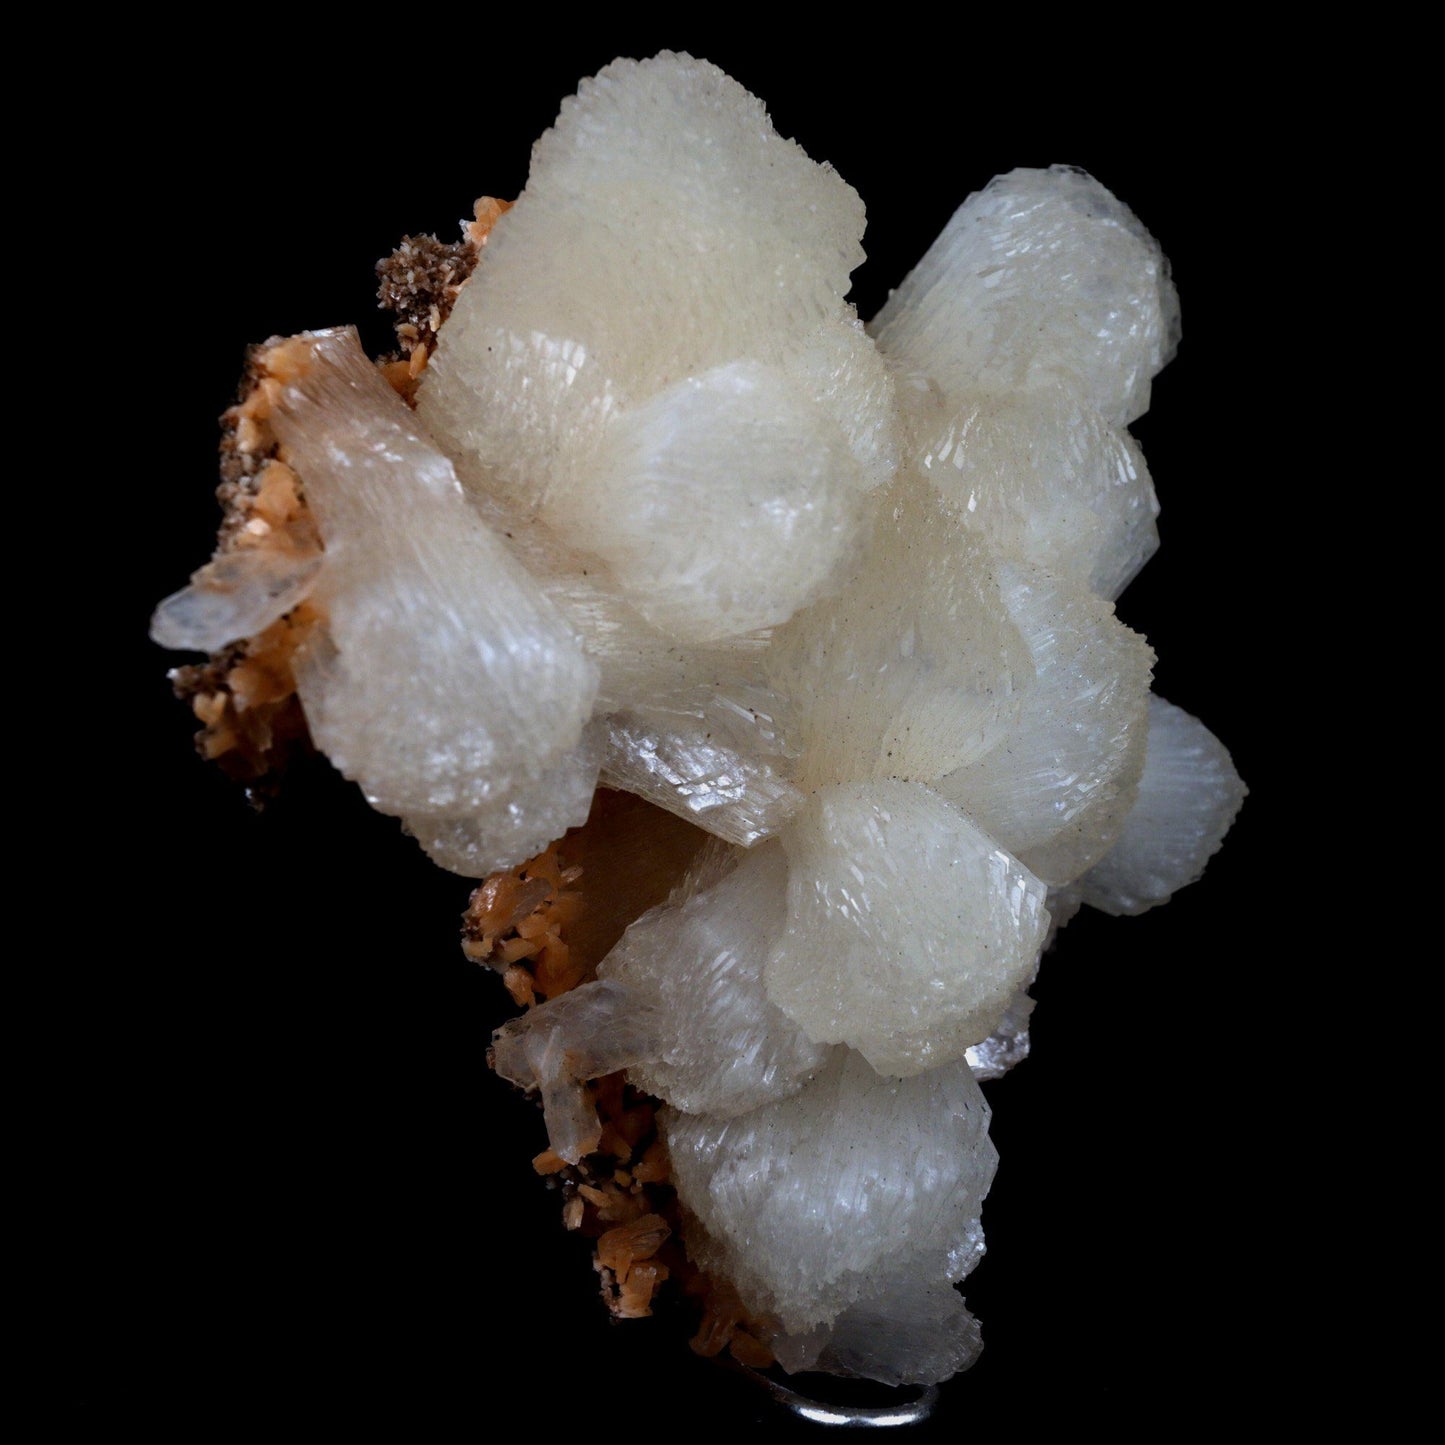 Stilbite Lusterous on Heulandite Natural Mineral Specimen # B 4917  https://www.superbminerals.us/products/stilbite-lusterous-on-heulandite-natural-mineral-specimen-b-4917  Features: A magnificent doubly terminated stilbite bowtie with outstanding wide shape is placed artistically on the blocky basalt matrix.&nbsp; The many glossy bone-white bladed heulandites scattered over the matrix beautifully compliment the very lustrous, transparent, cream-colored stilbite.